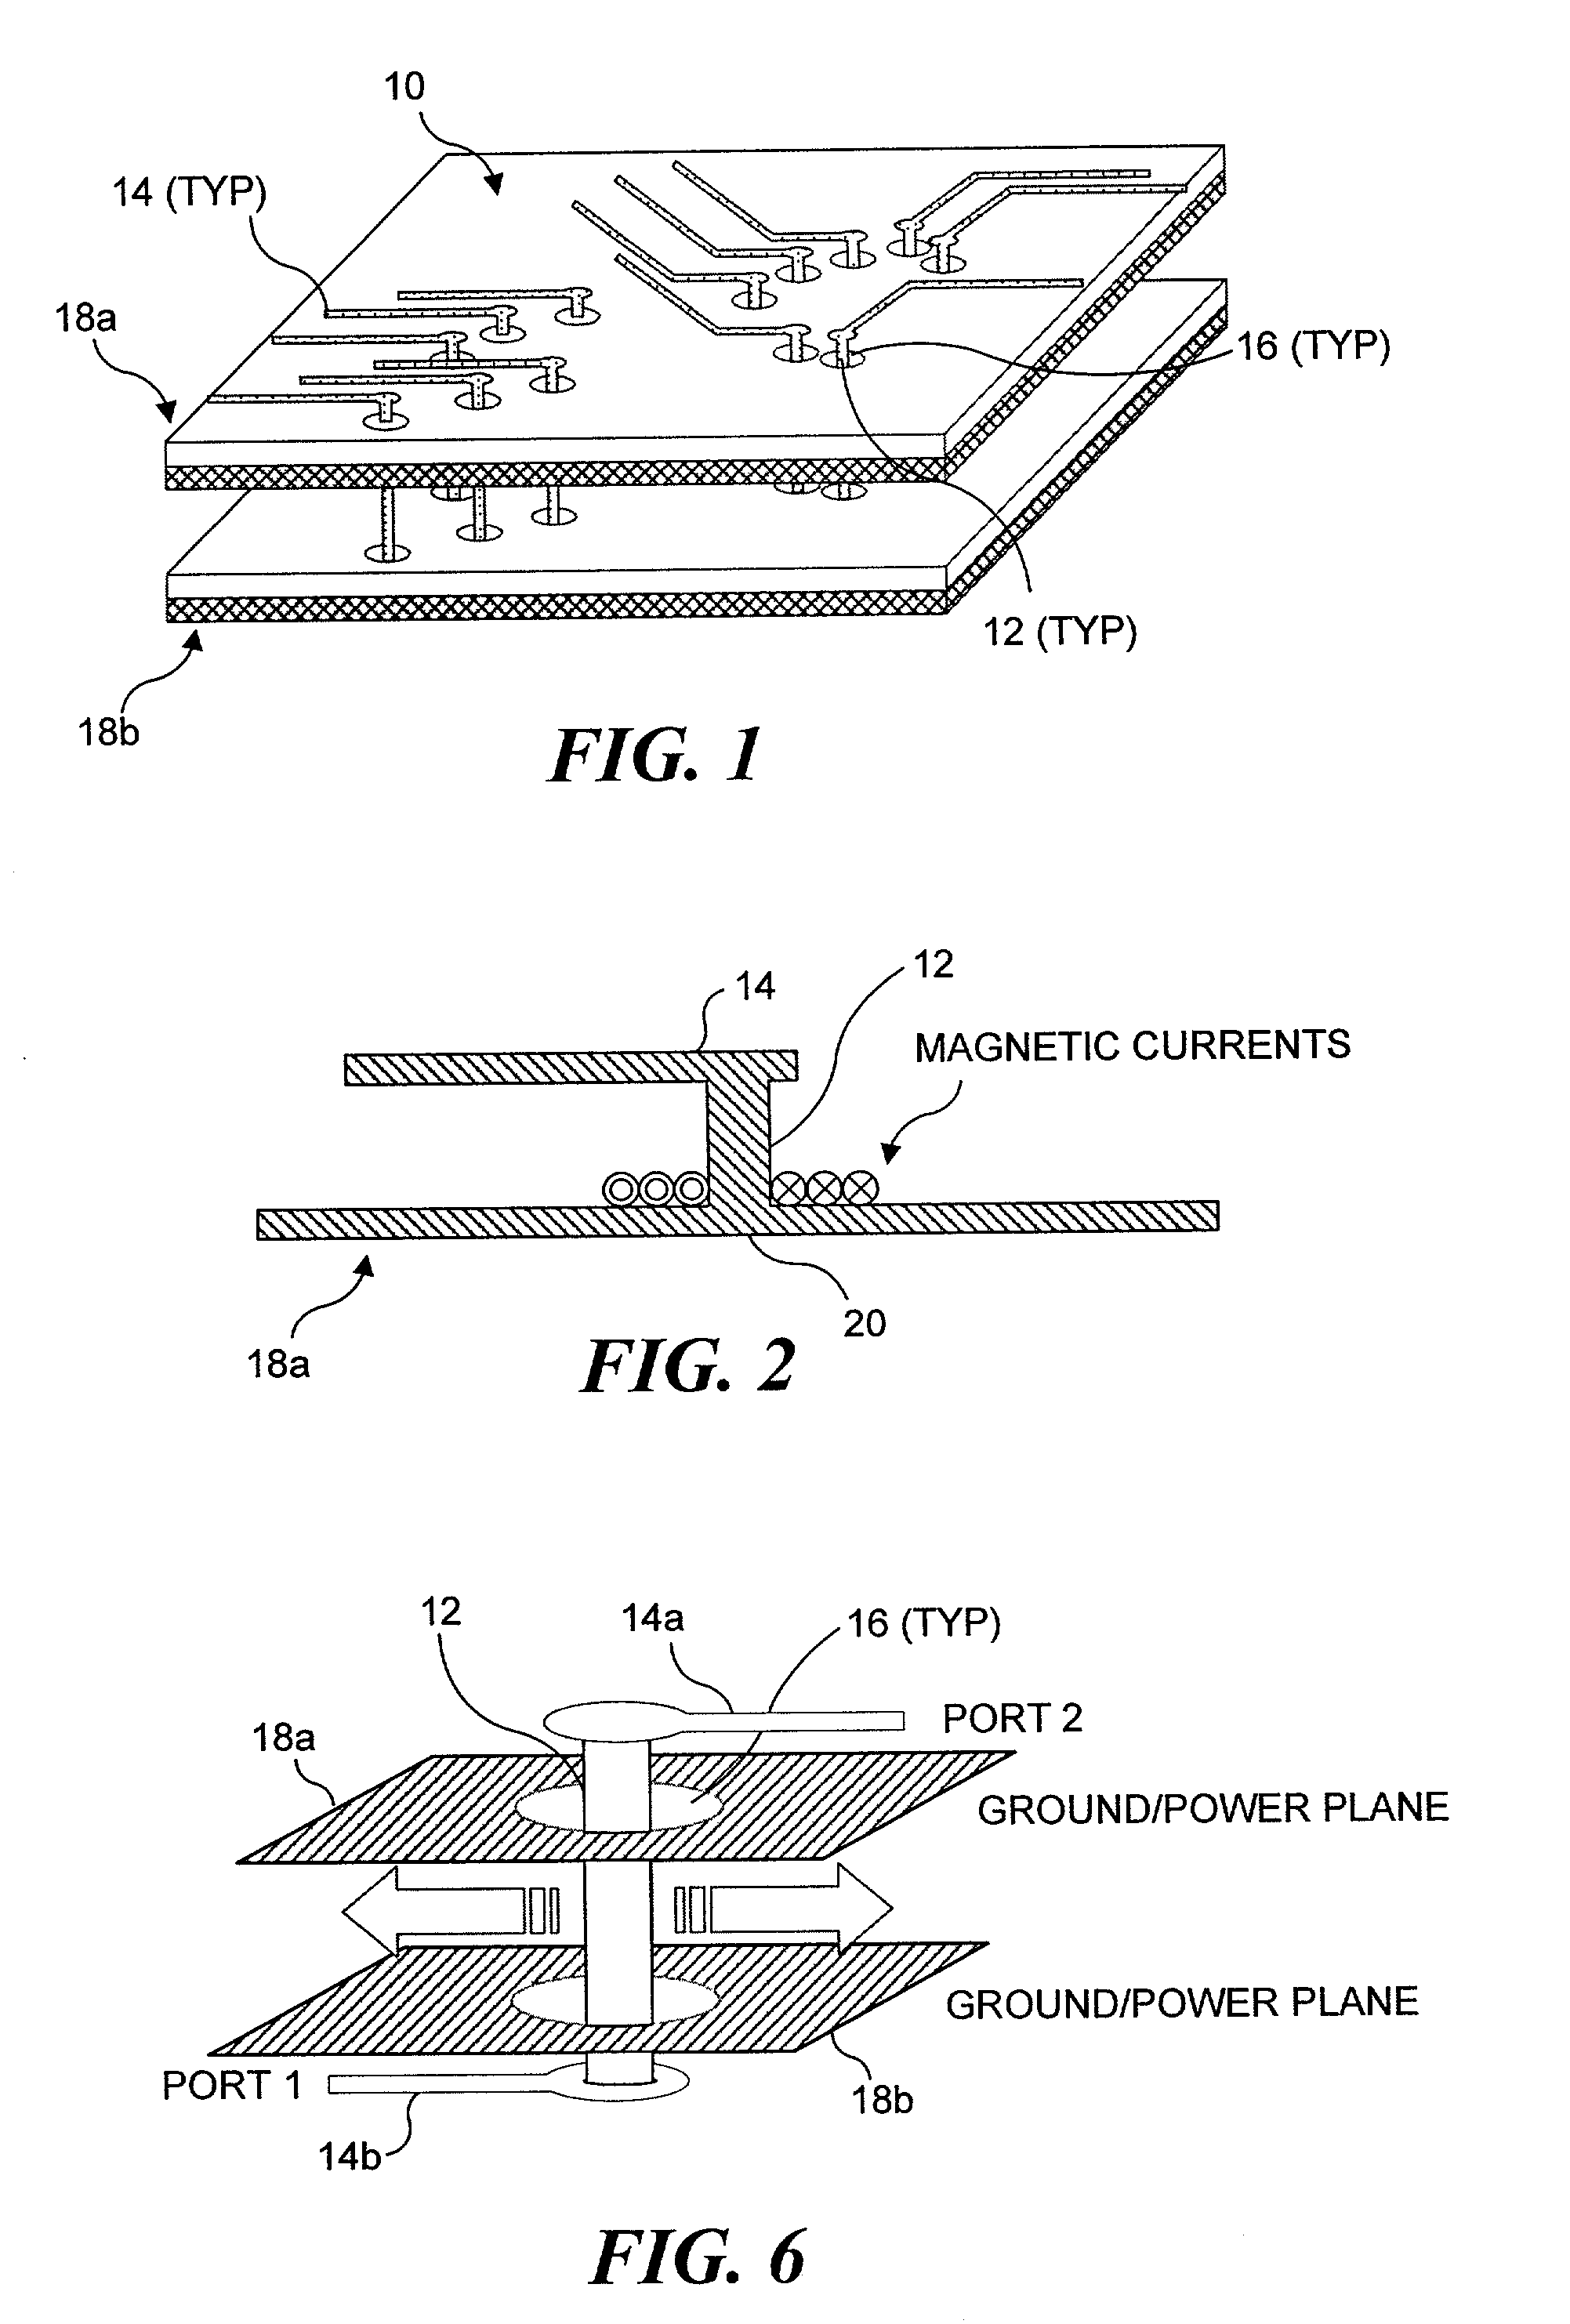 Methods for modeling interactions between massively coupled multiple vias in multilayered electronic packaging structures